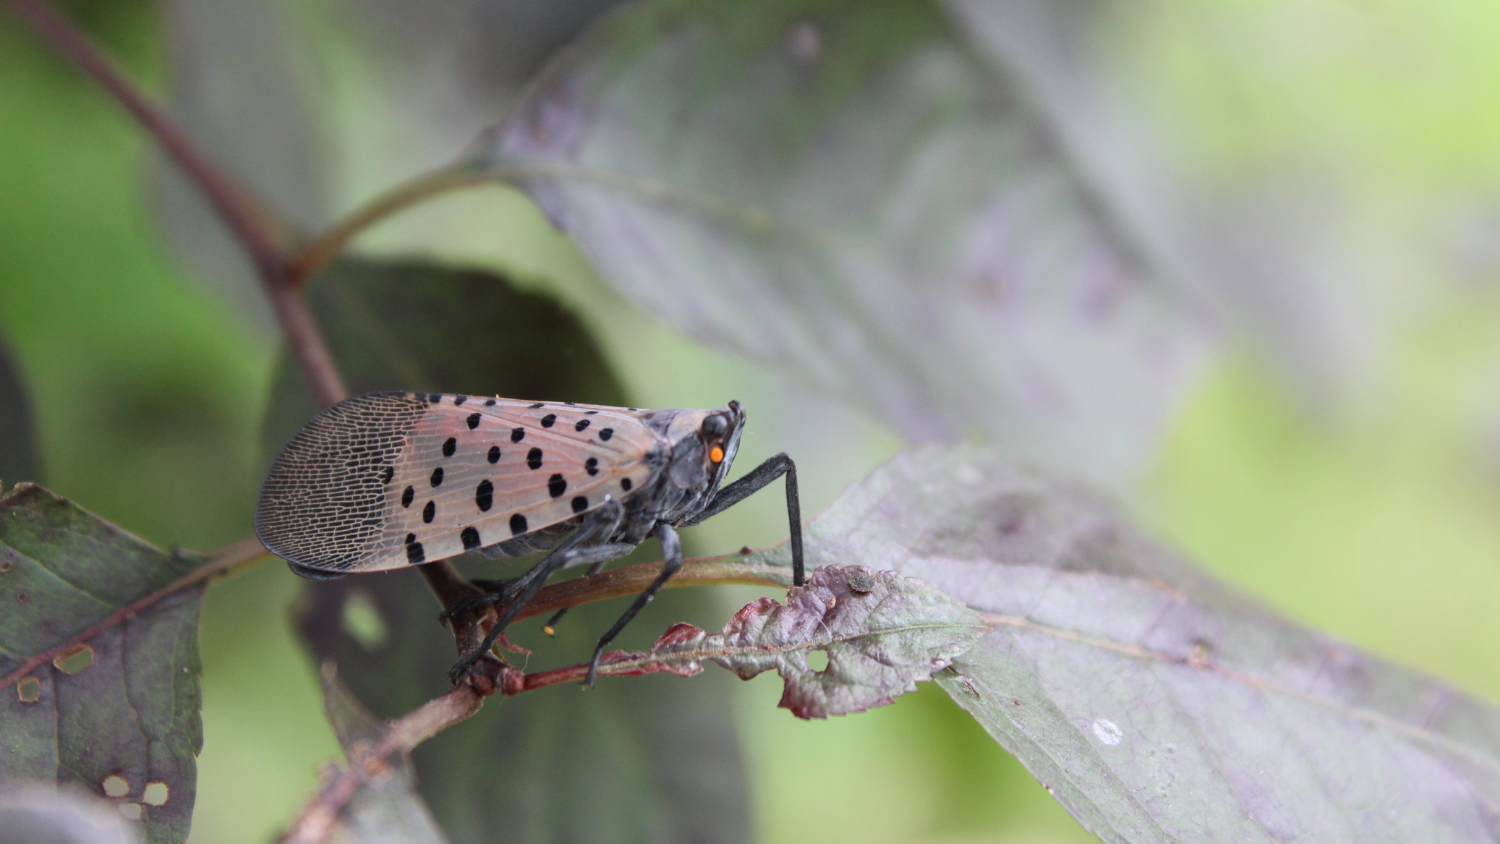 a spotted lanternfly on a plant